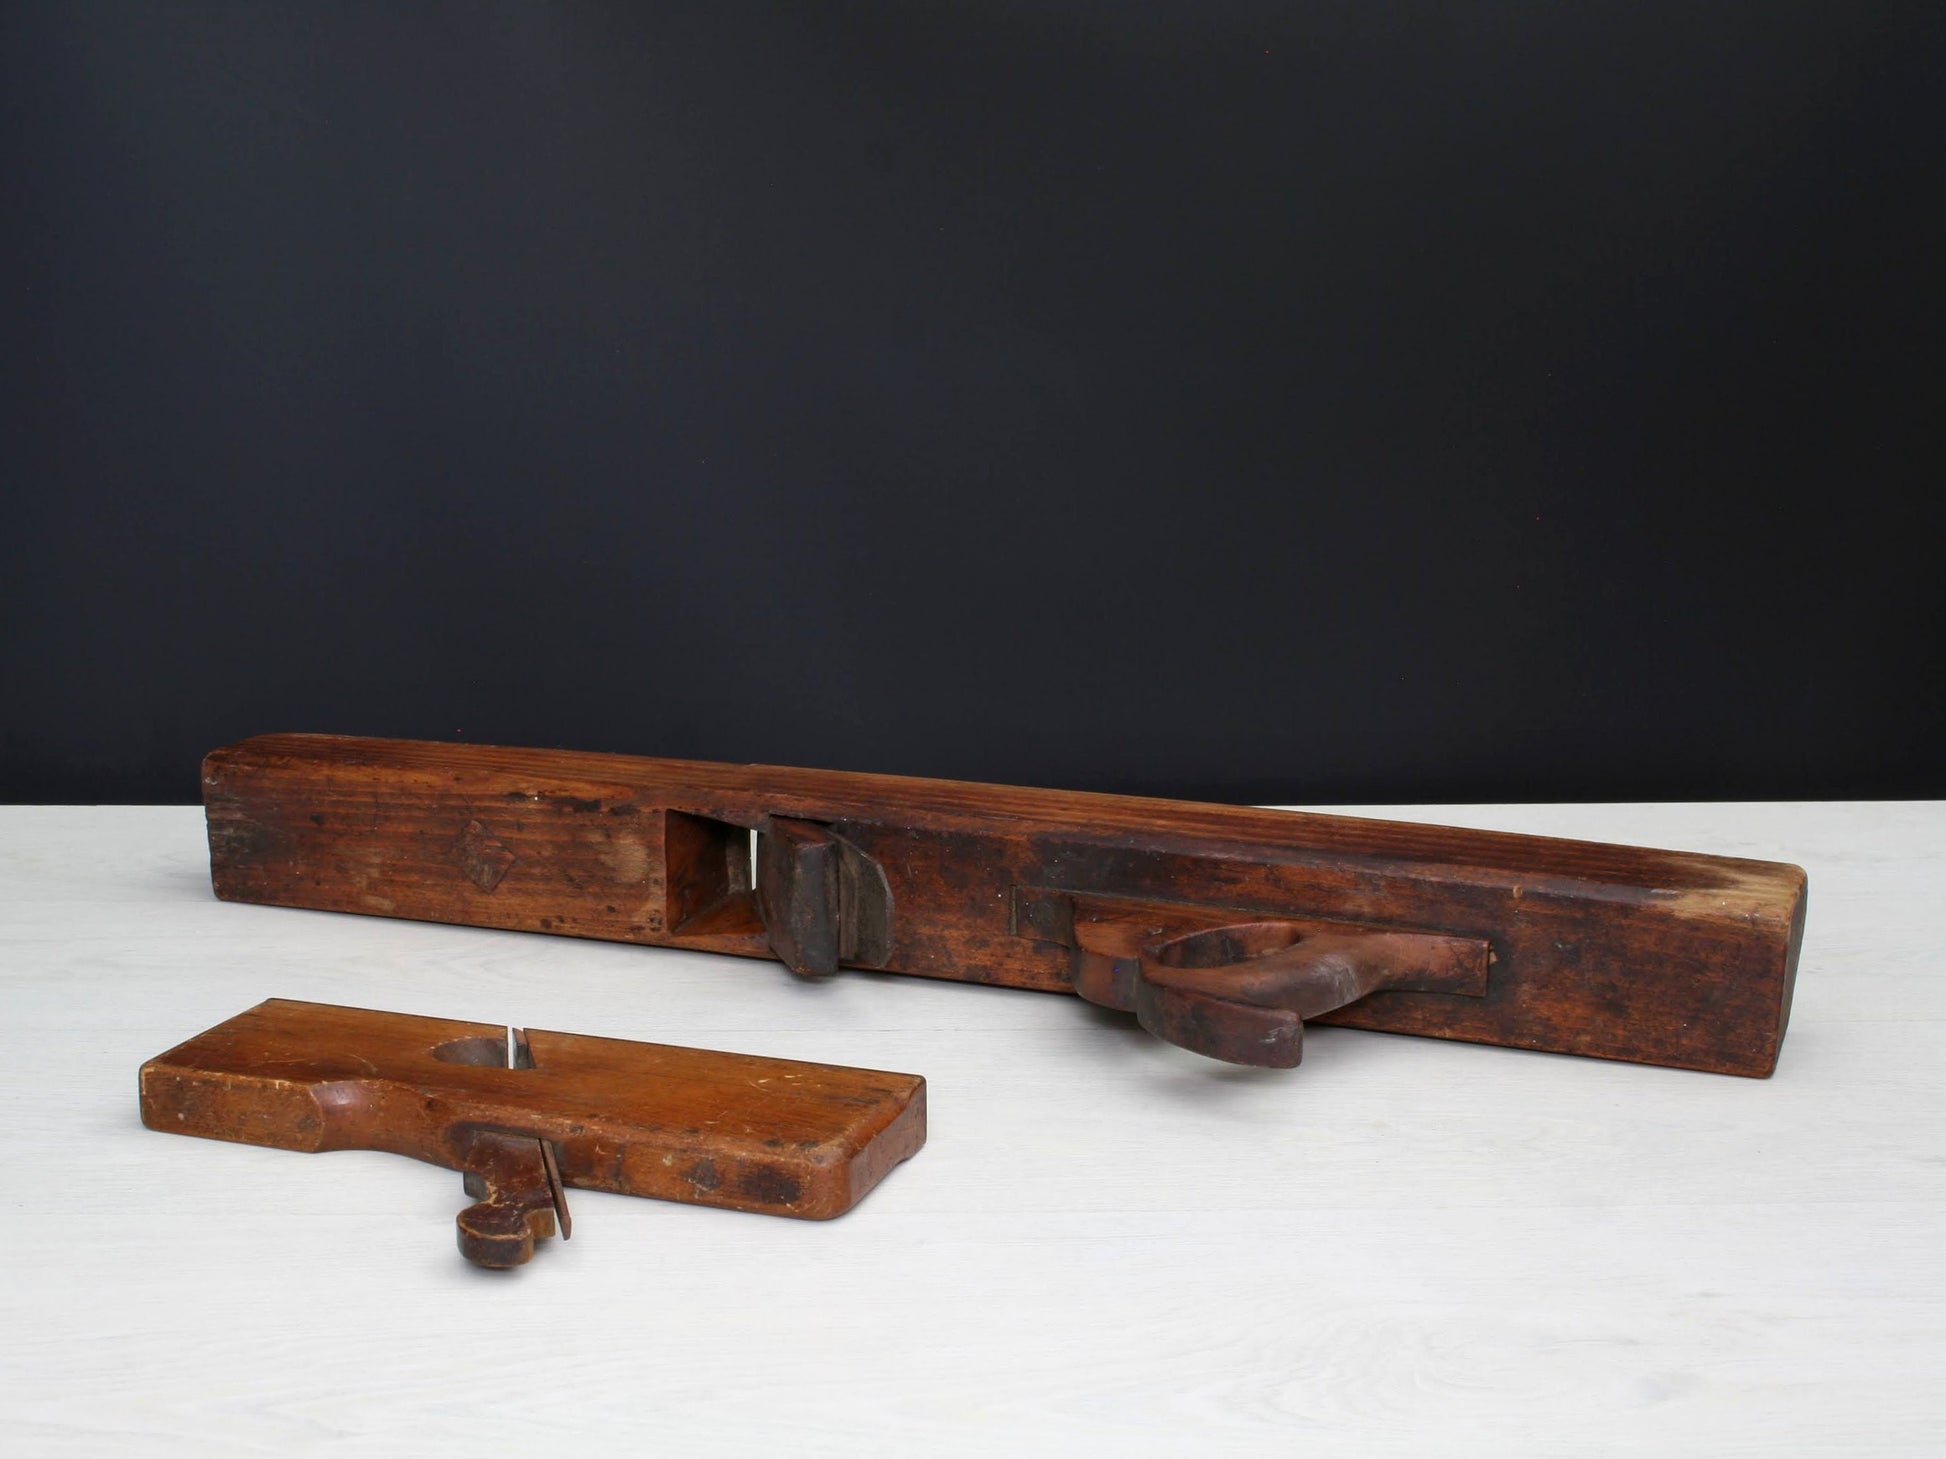 Woodworking Tools-Rustic Decor | Antique Tools Collectible